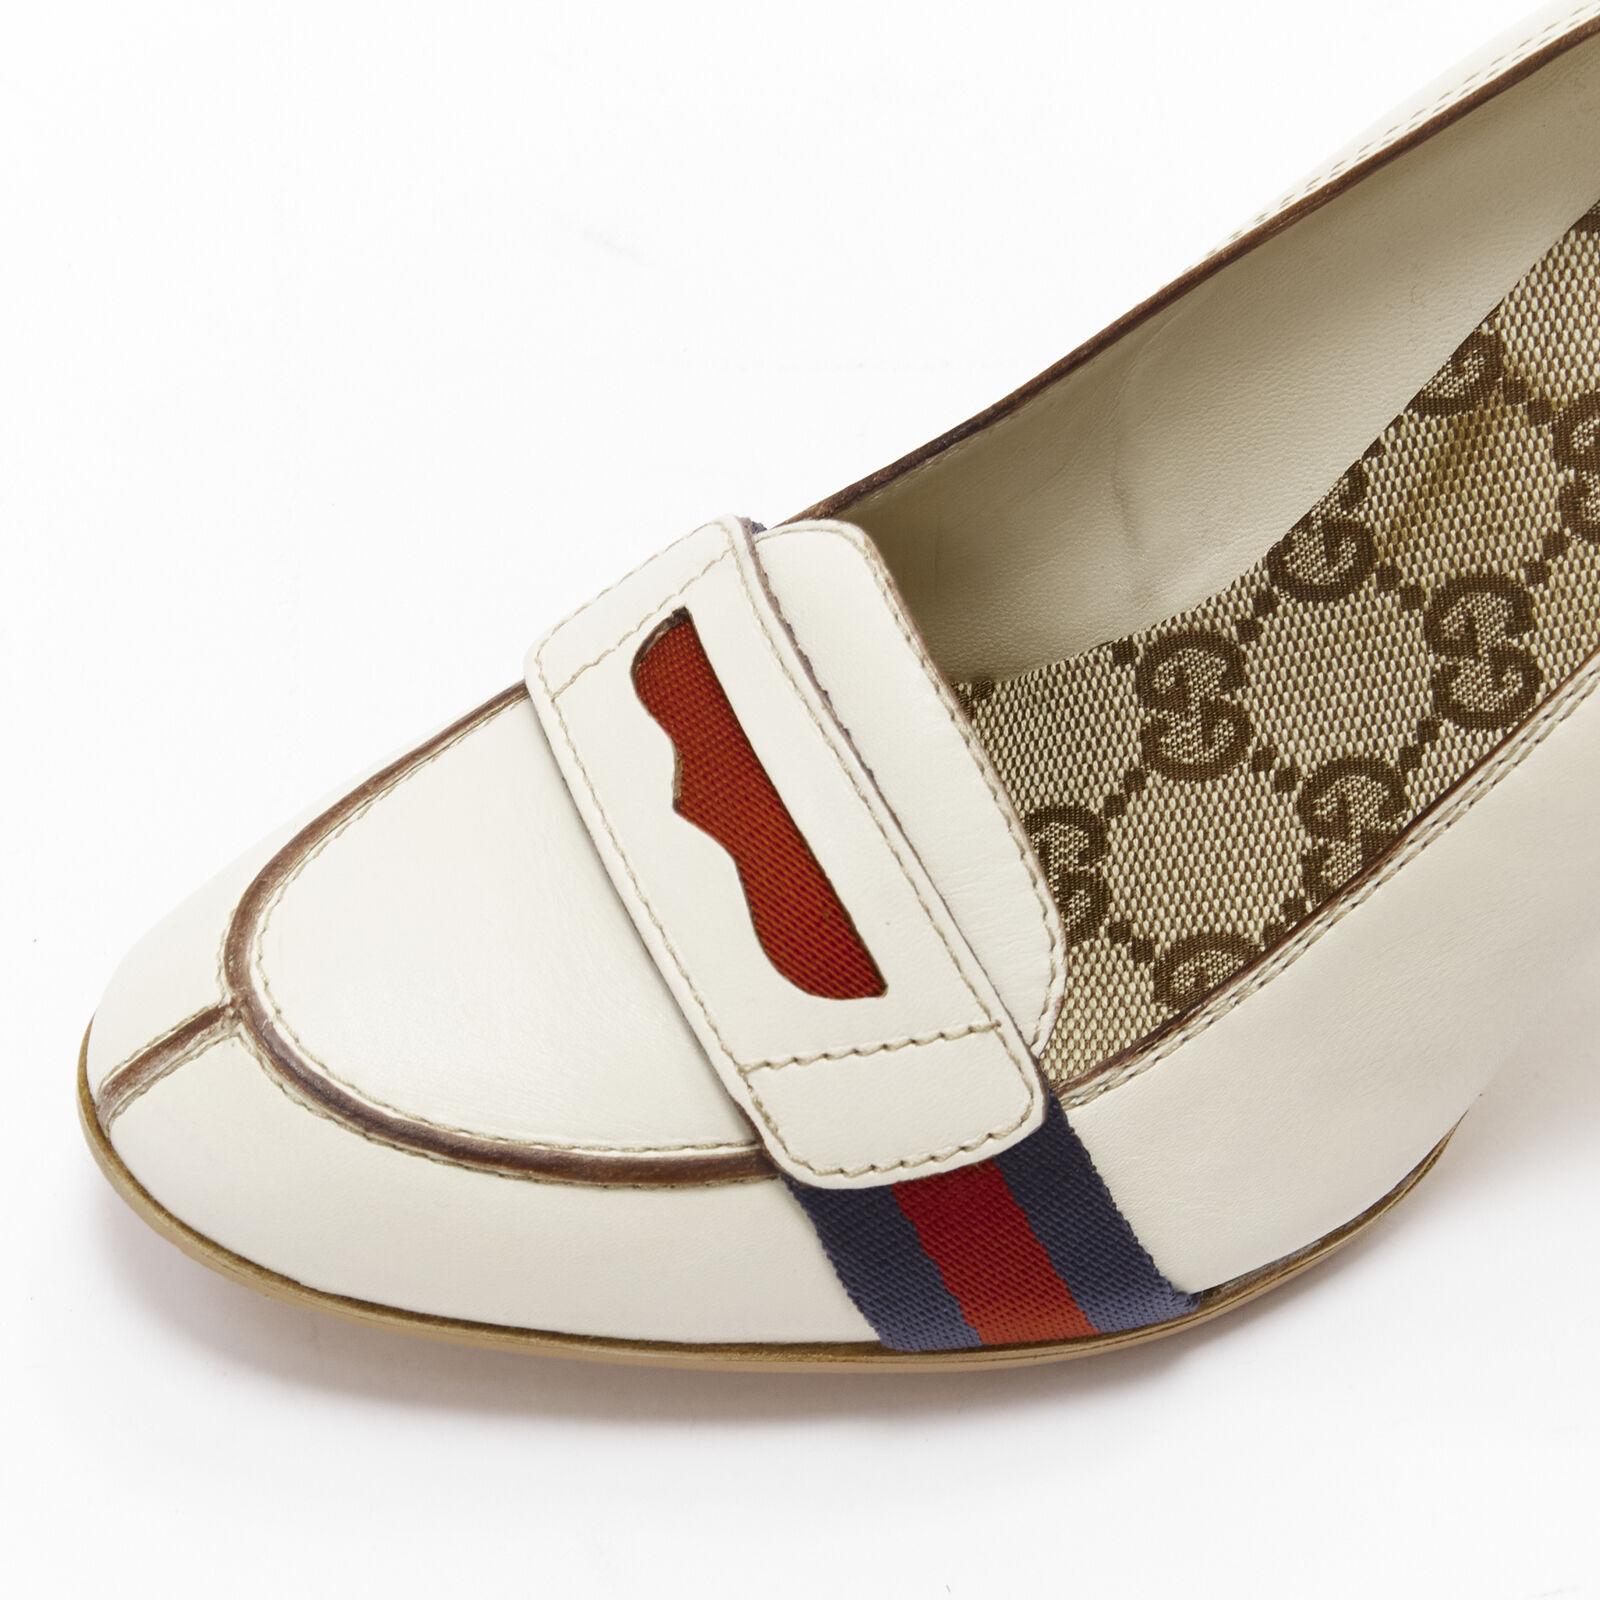 GUCCI white signature Web brown piping high heel loafer pumps EU36.5 For Sale 1